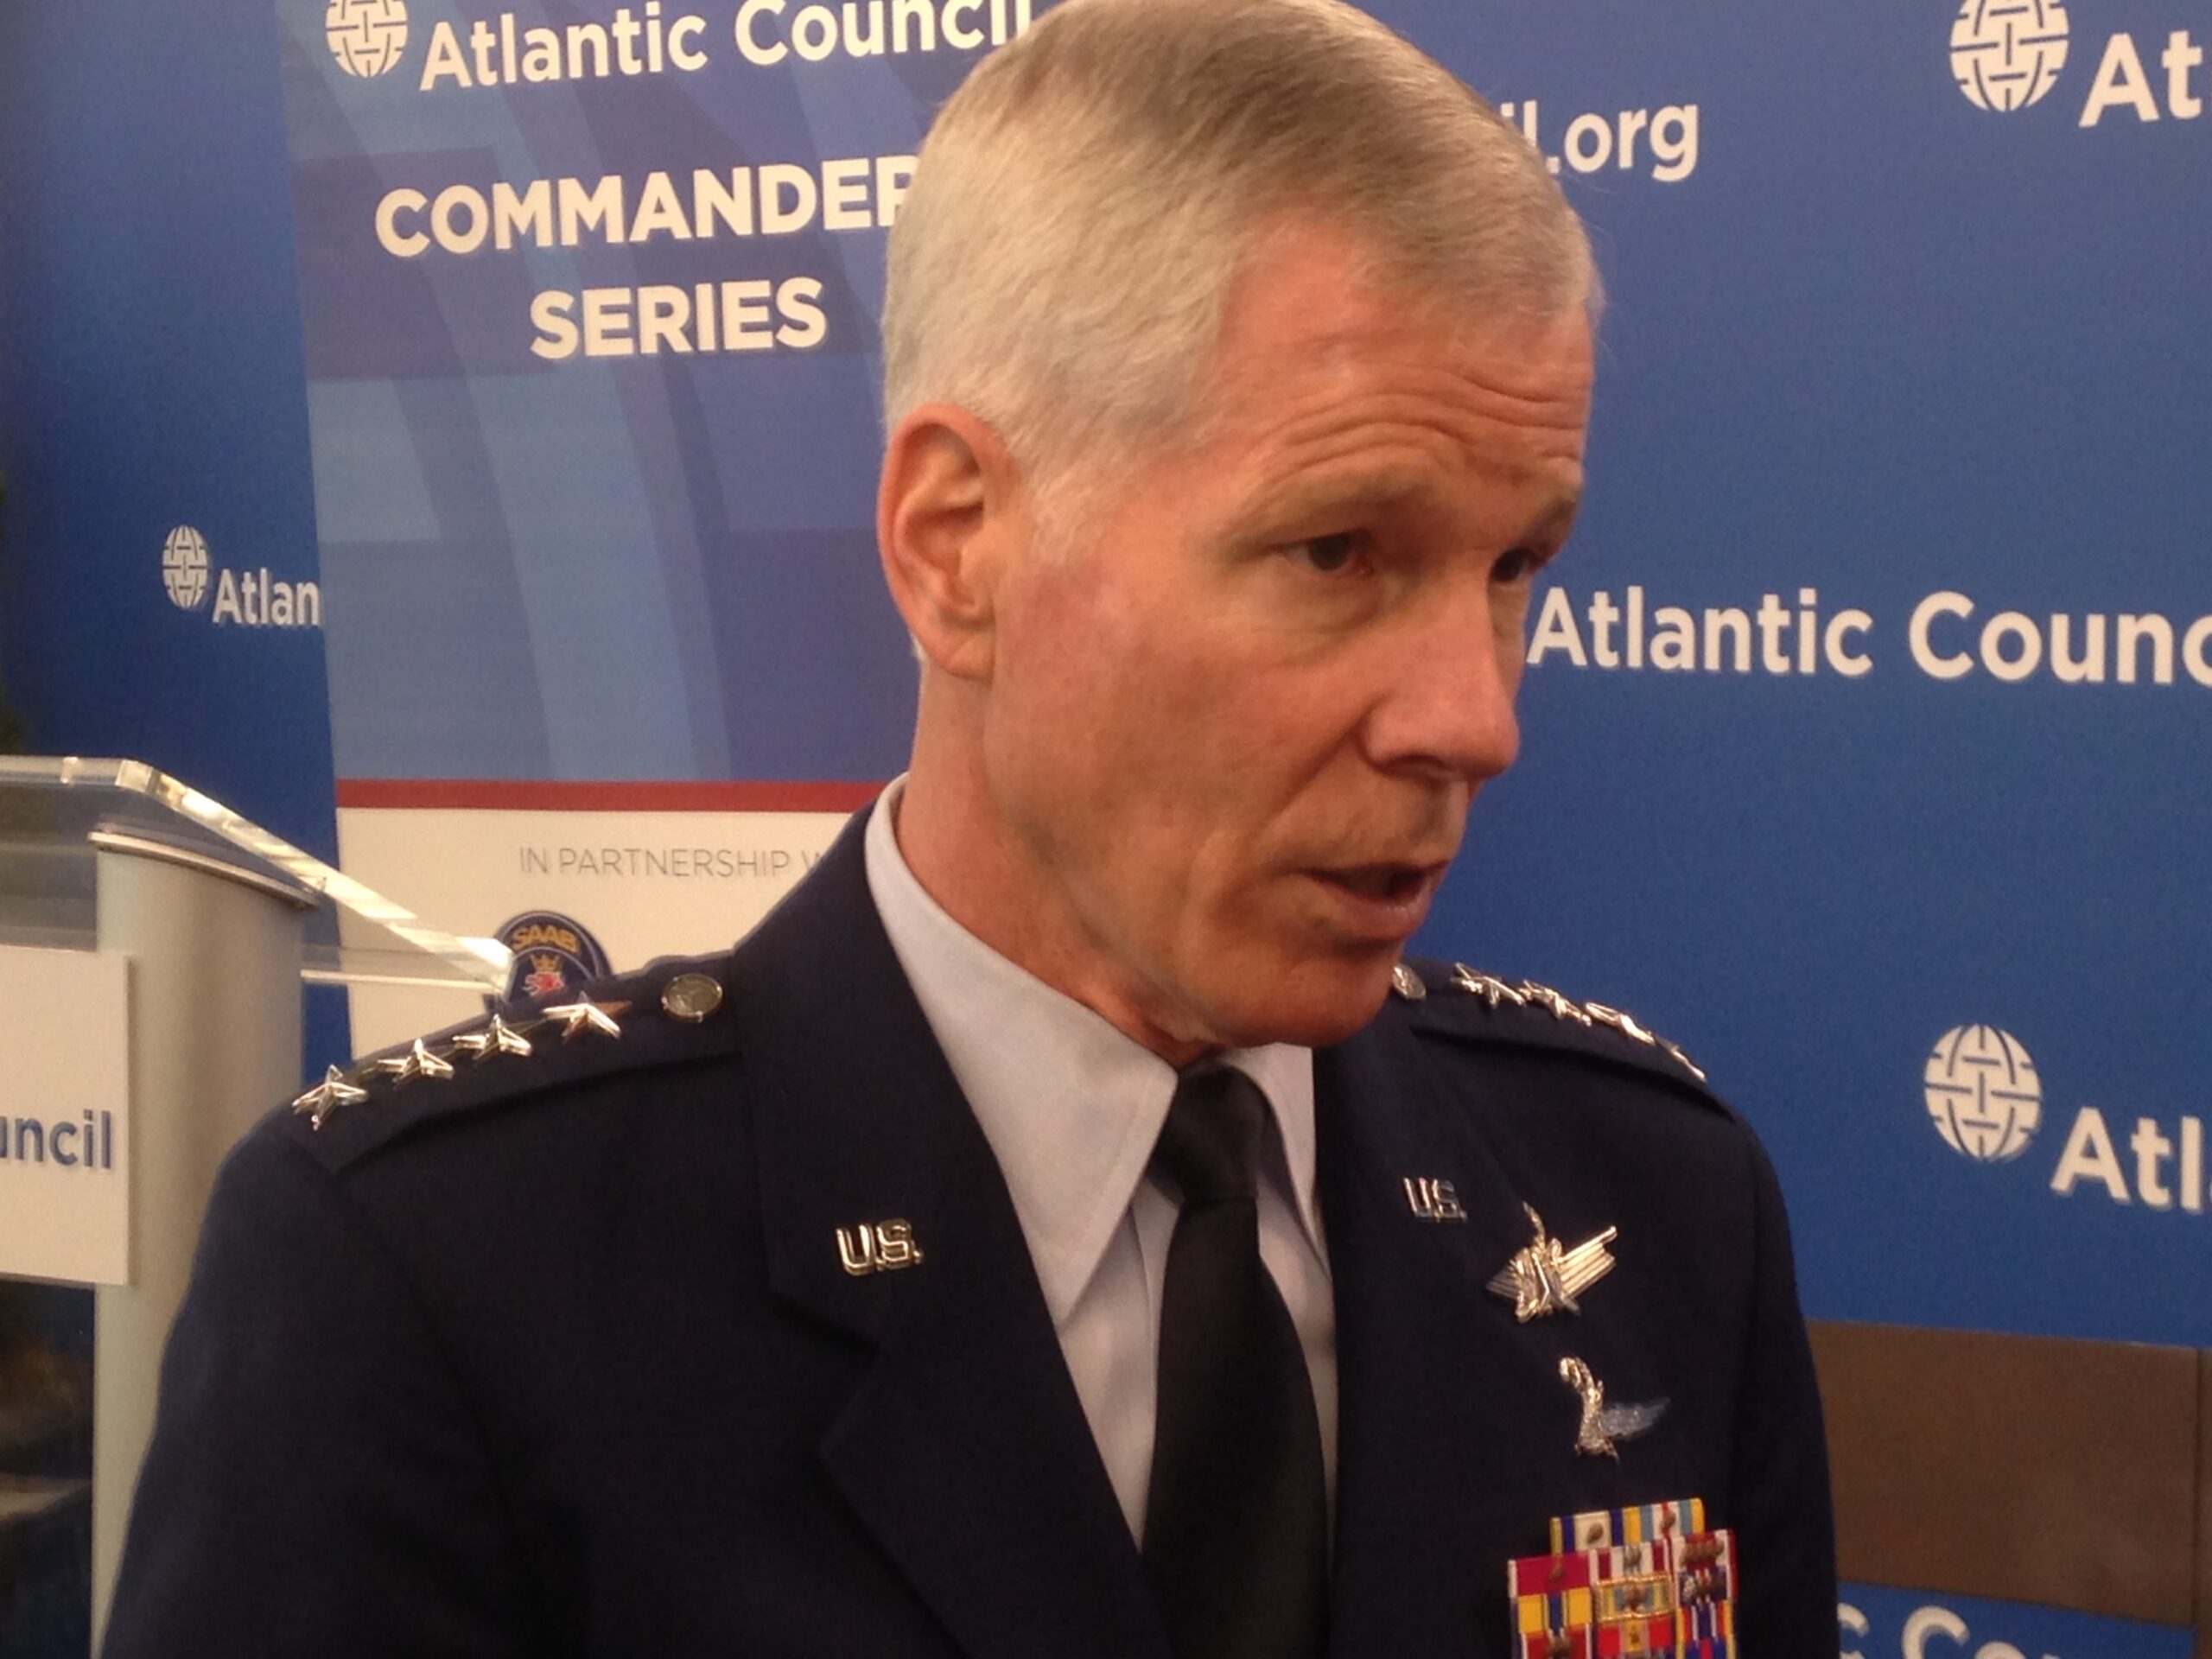 US Can’t ‘Stick Our Heads In The Sand’ On Space Threats: Gen. Shelton